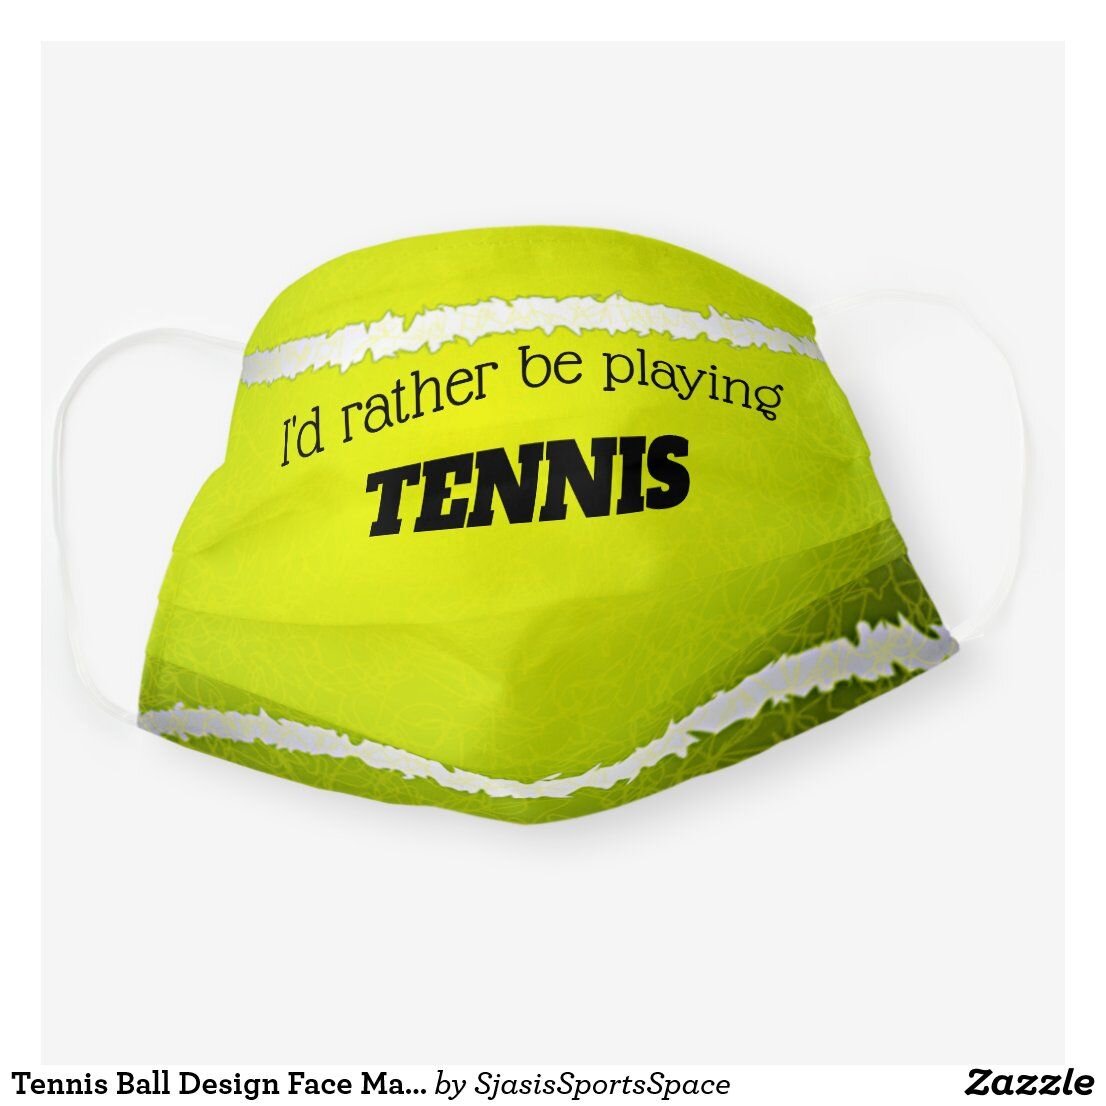 Beyond the Mask | Tennis with Face Covering | Mask While Playing Tennis ...